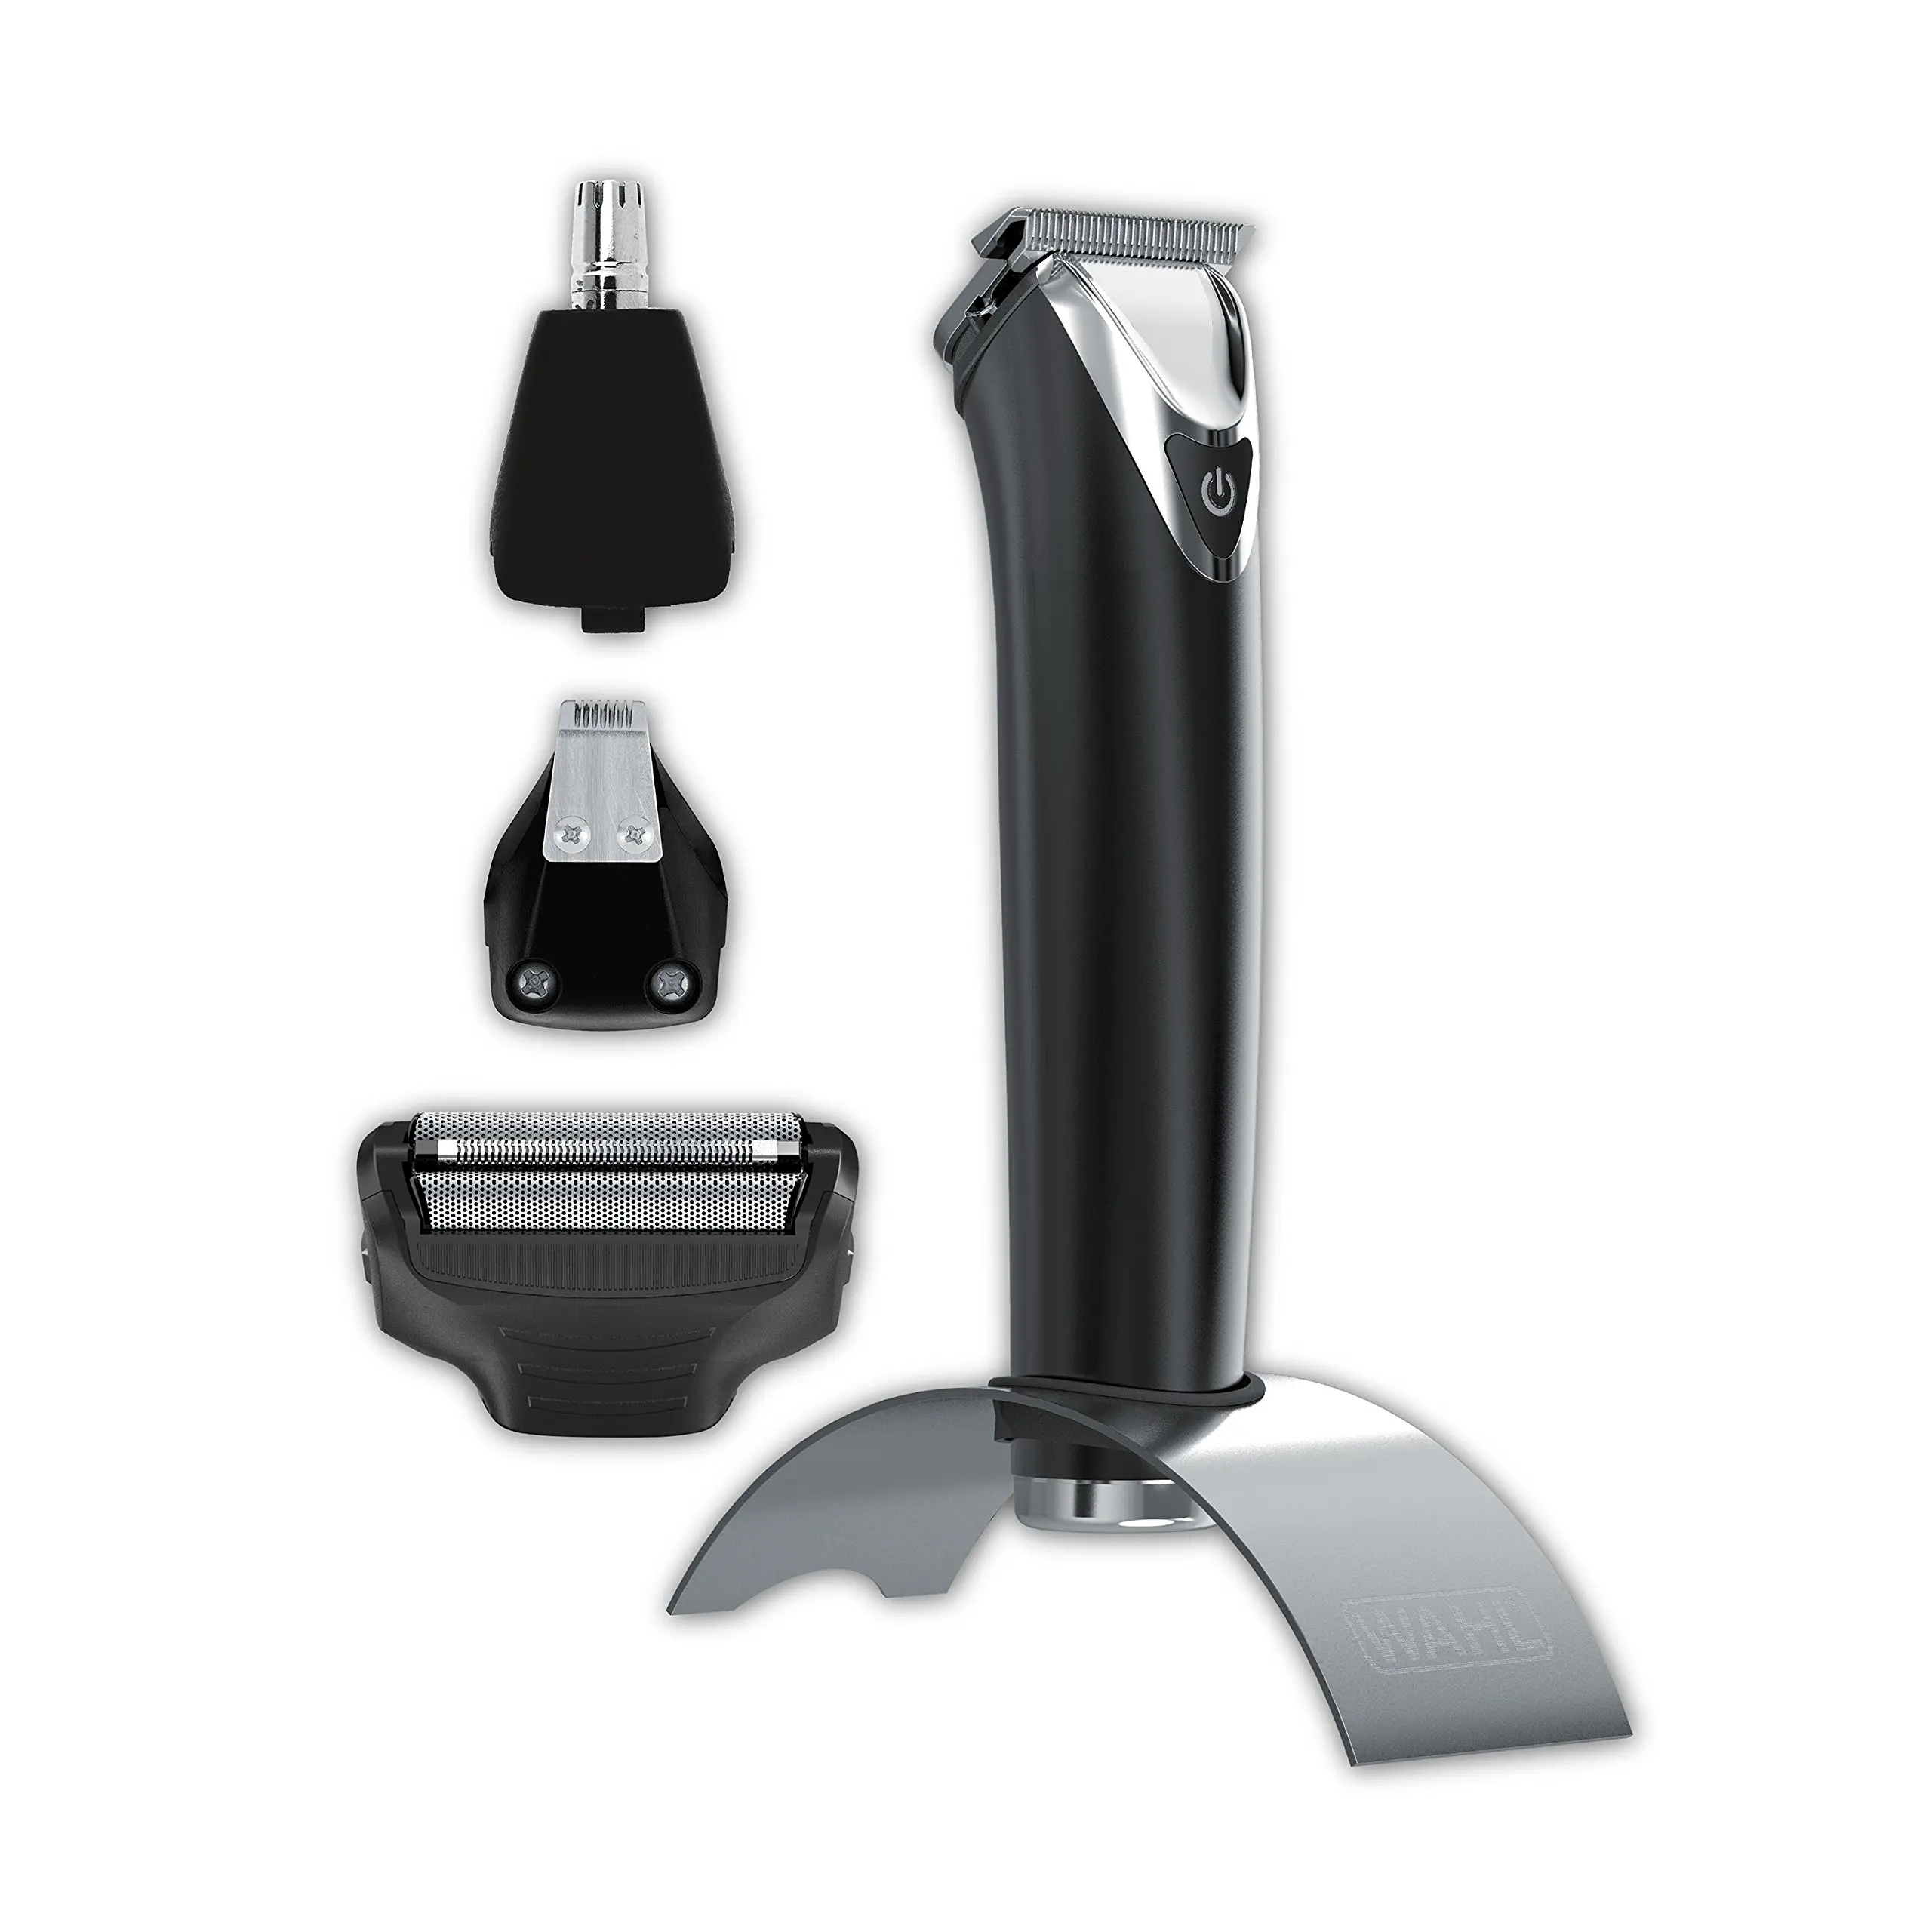 wahl stainless steel lithium ion